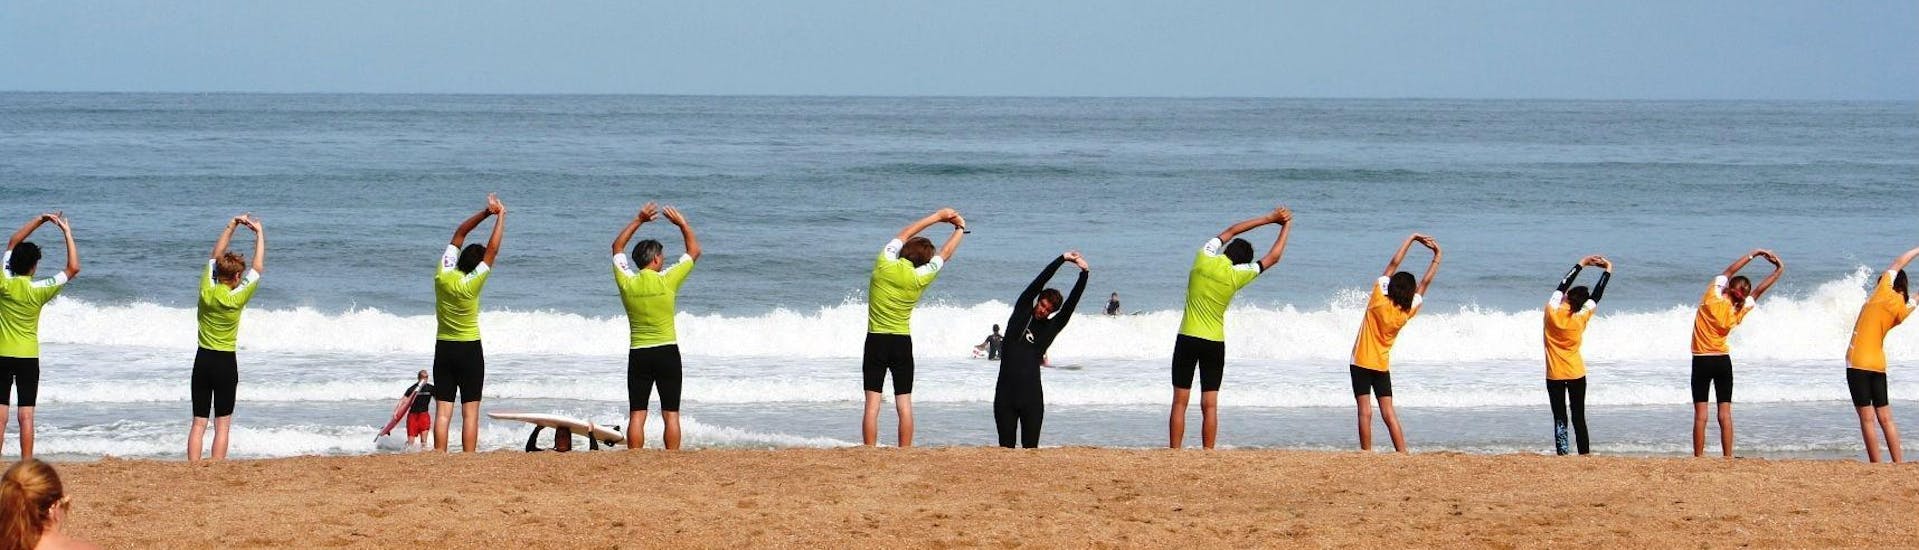 Surfers are warming up on the beach before the start of their Surfing Lessons on the Marinella Beach in Anglet with the surf school Le Club de la Glisse.